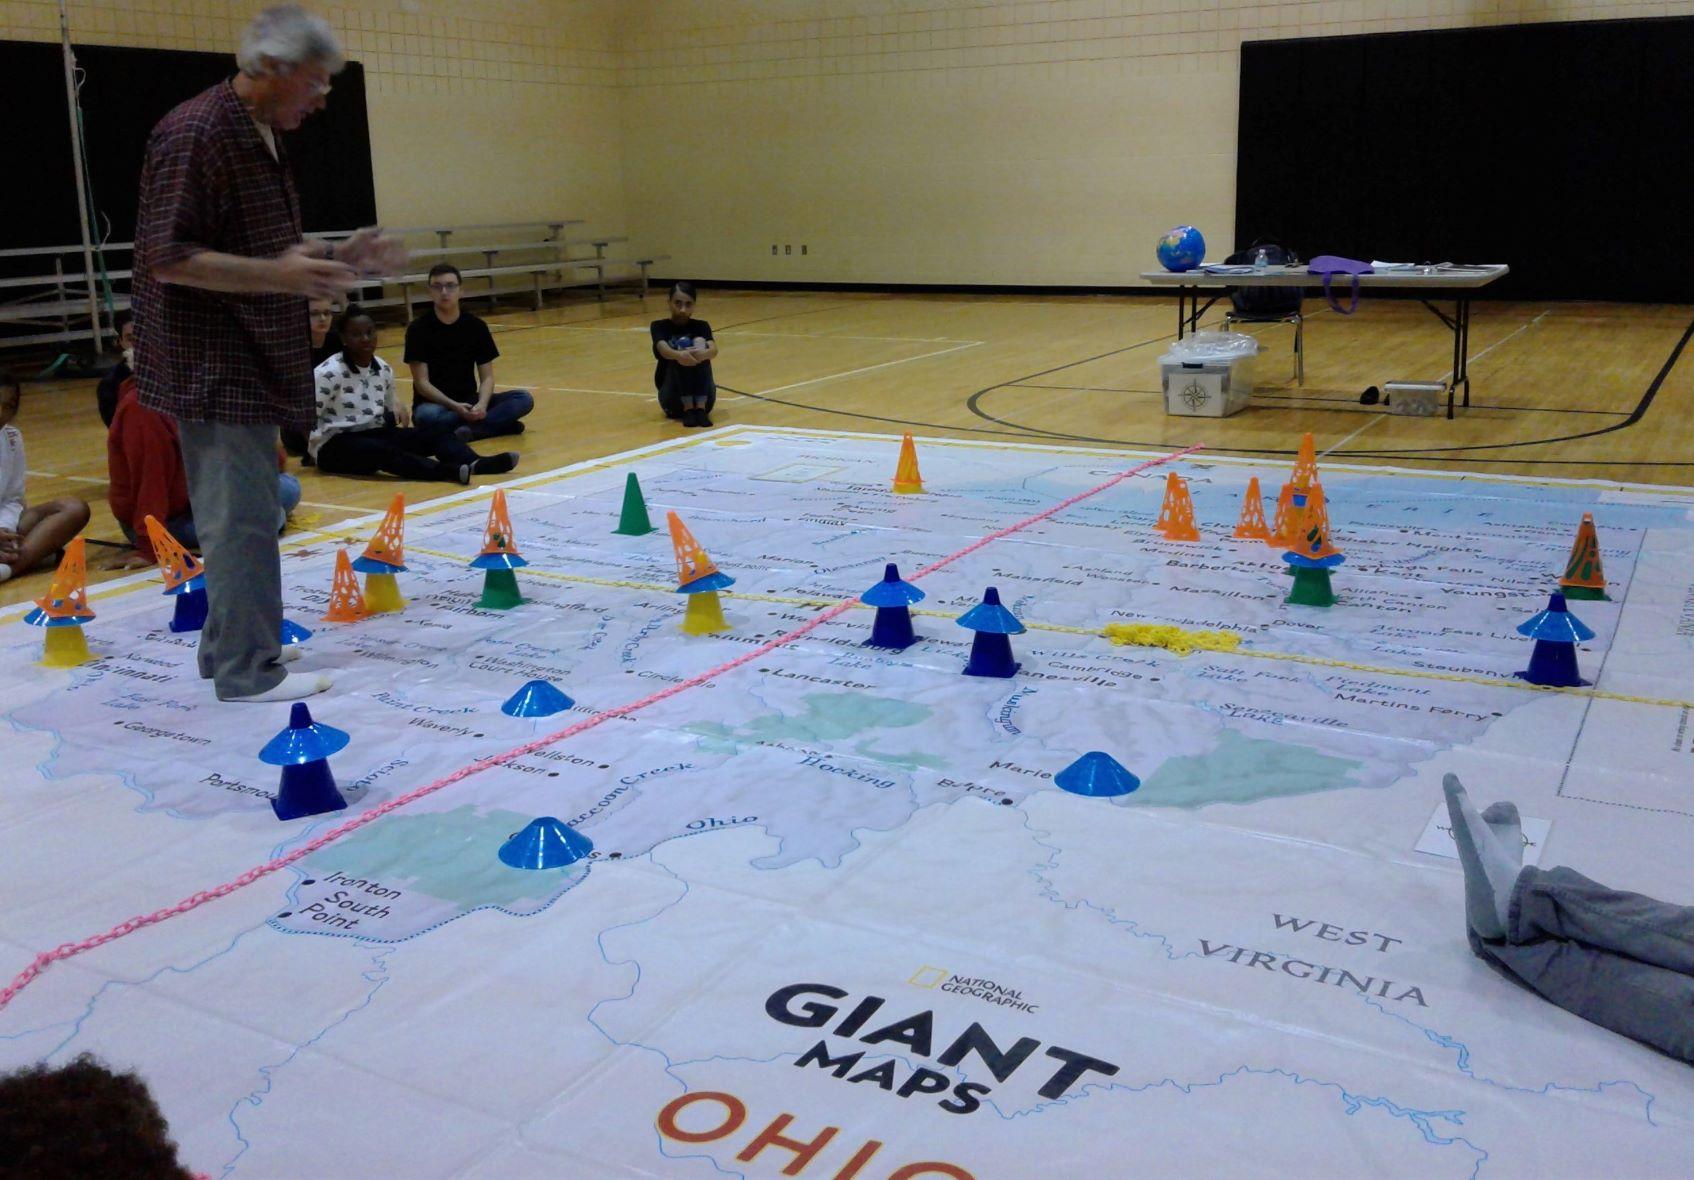 A teacher using the Giant Map of Ohio during a class